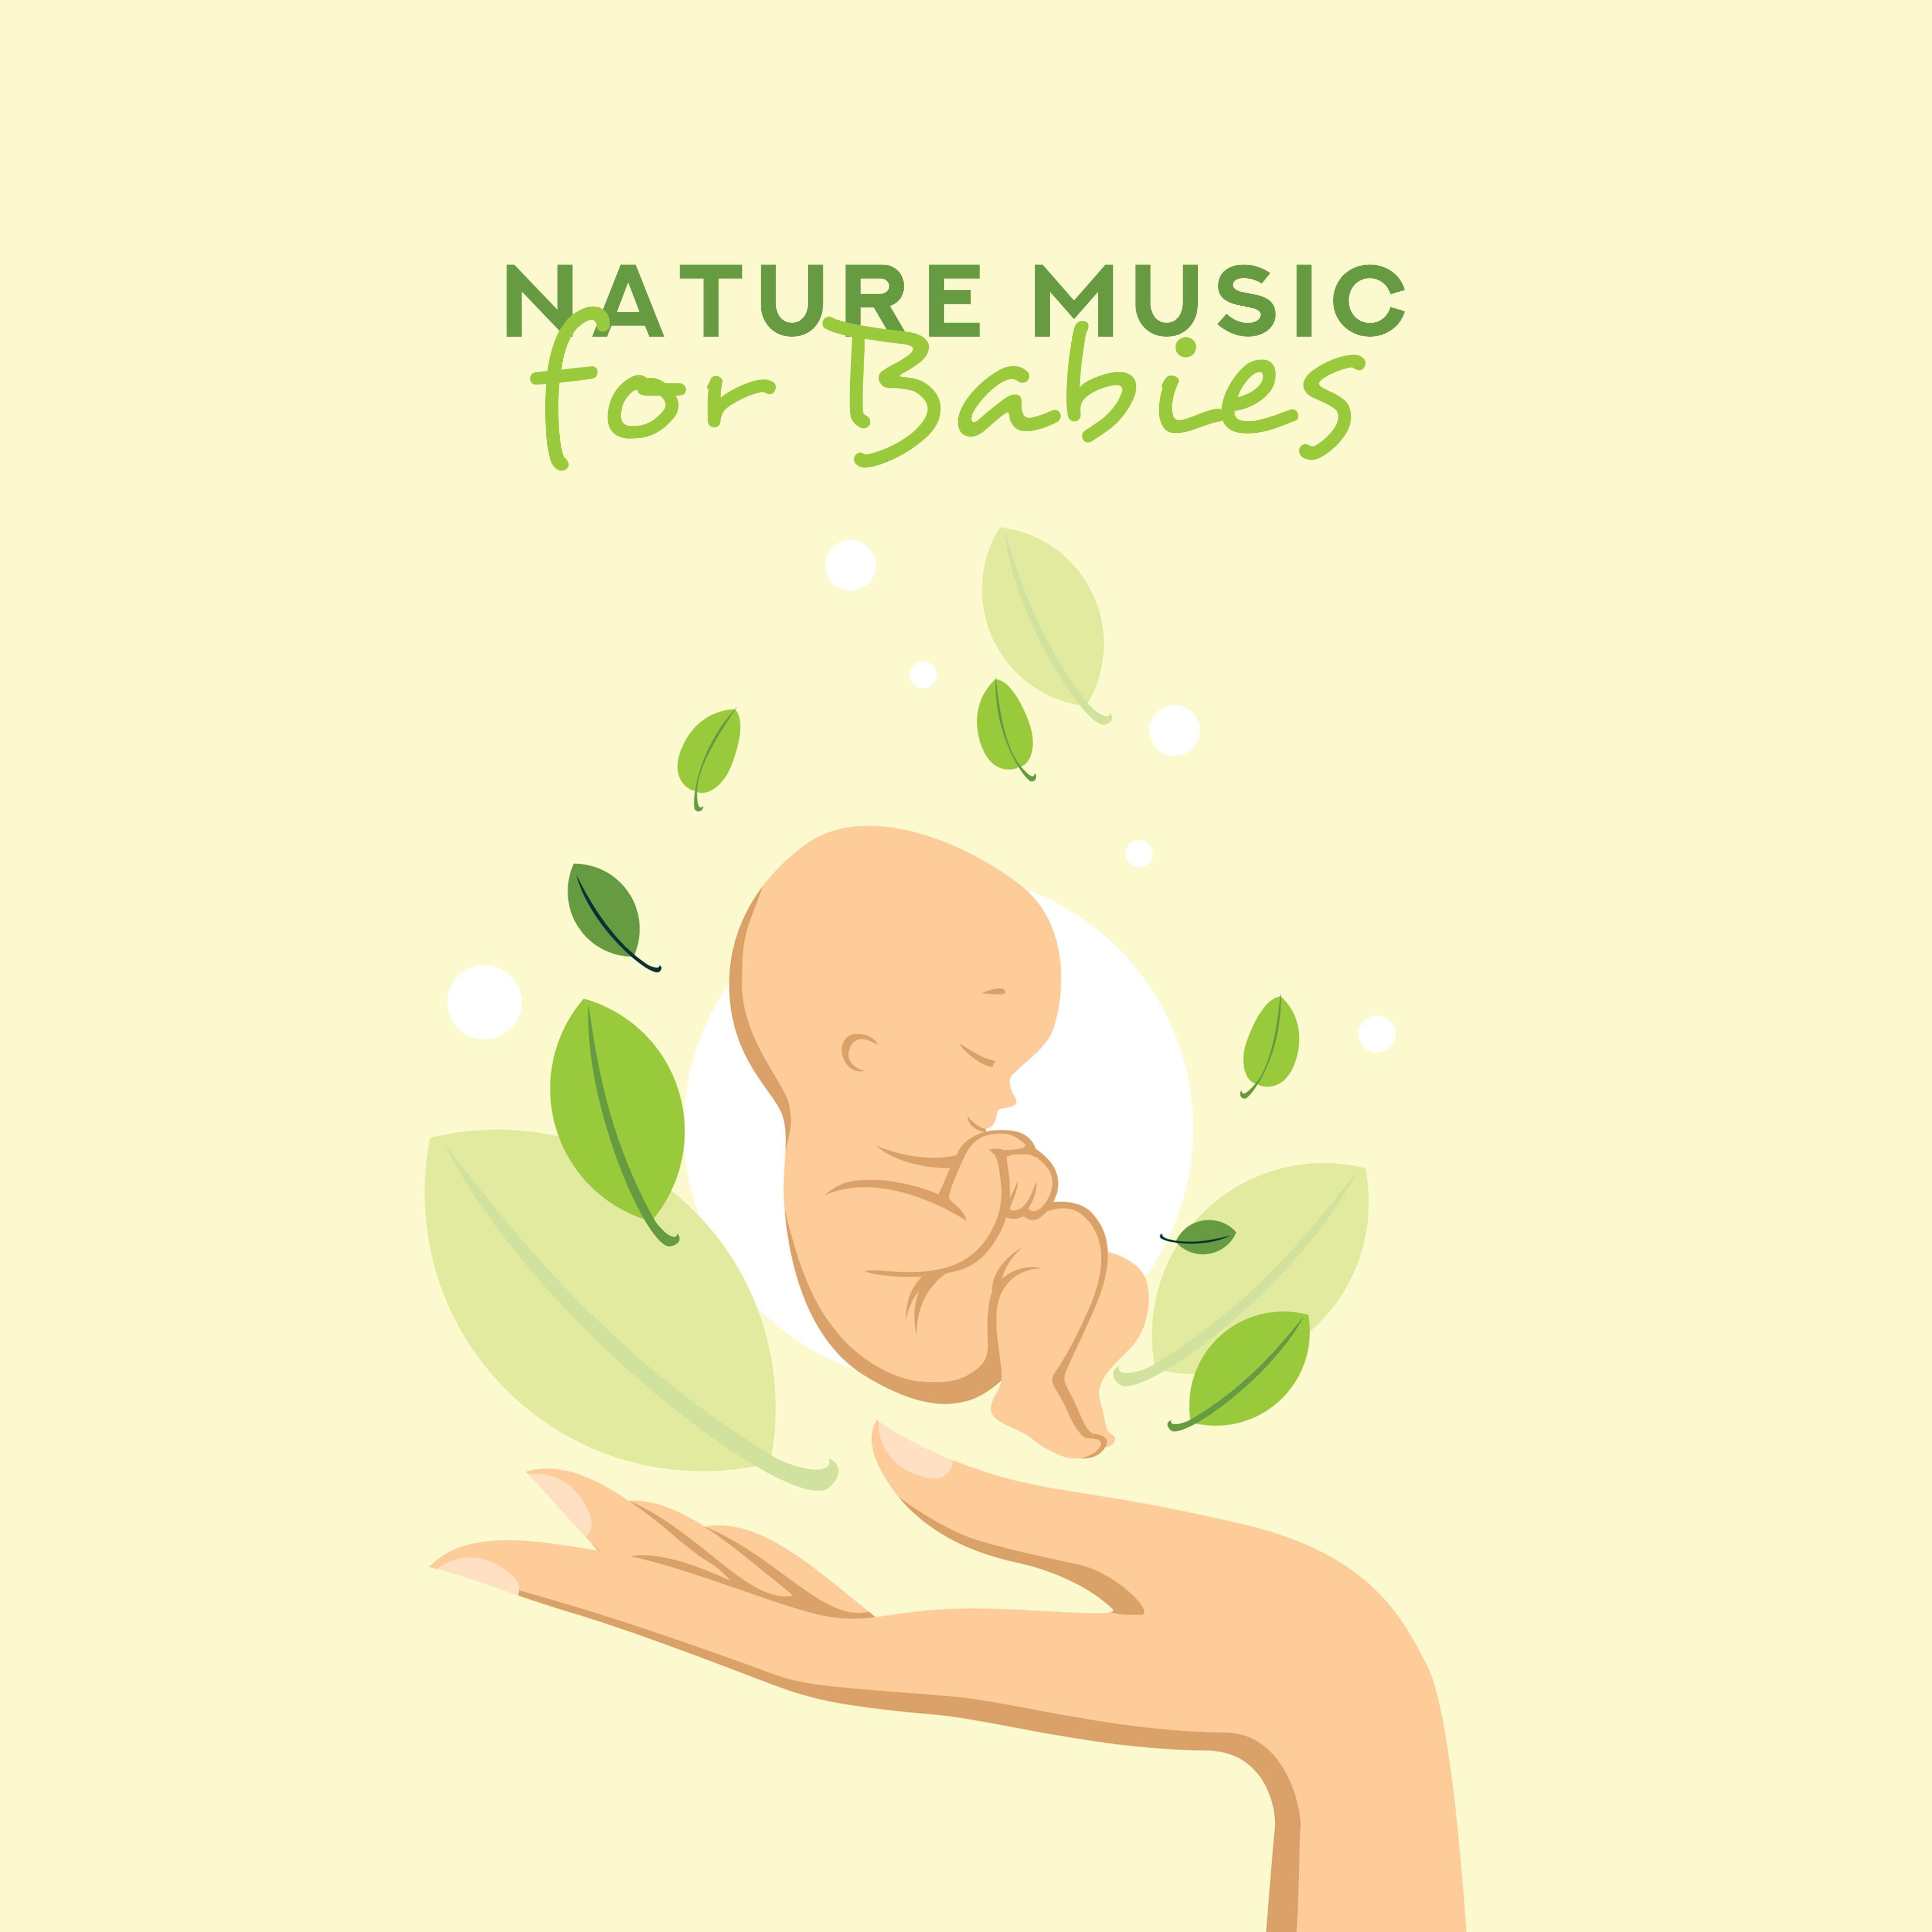 Nature Music for Babies: Sweet Music at Night, Sleeping Lullabies, Zen Serenity, Cradle Songs, Nature Sounds, Music to Pillow